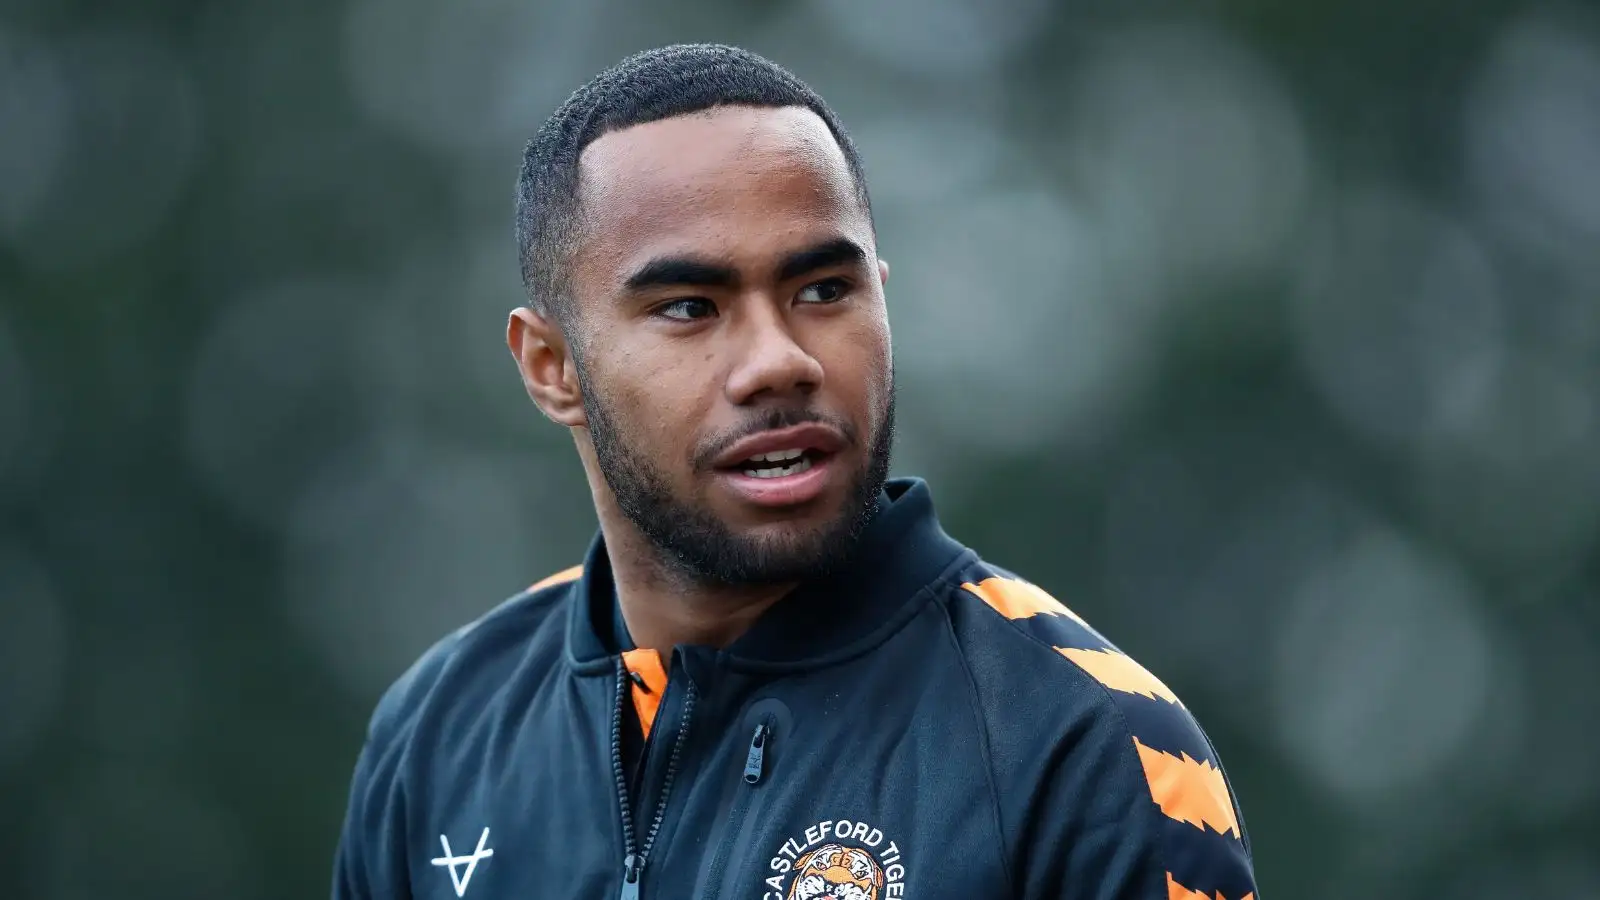 Castleford coach lays down challenge for Jason Qareqare with starlet recalled from loan